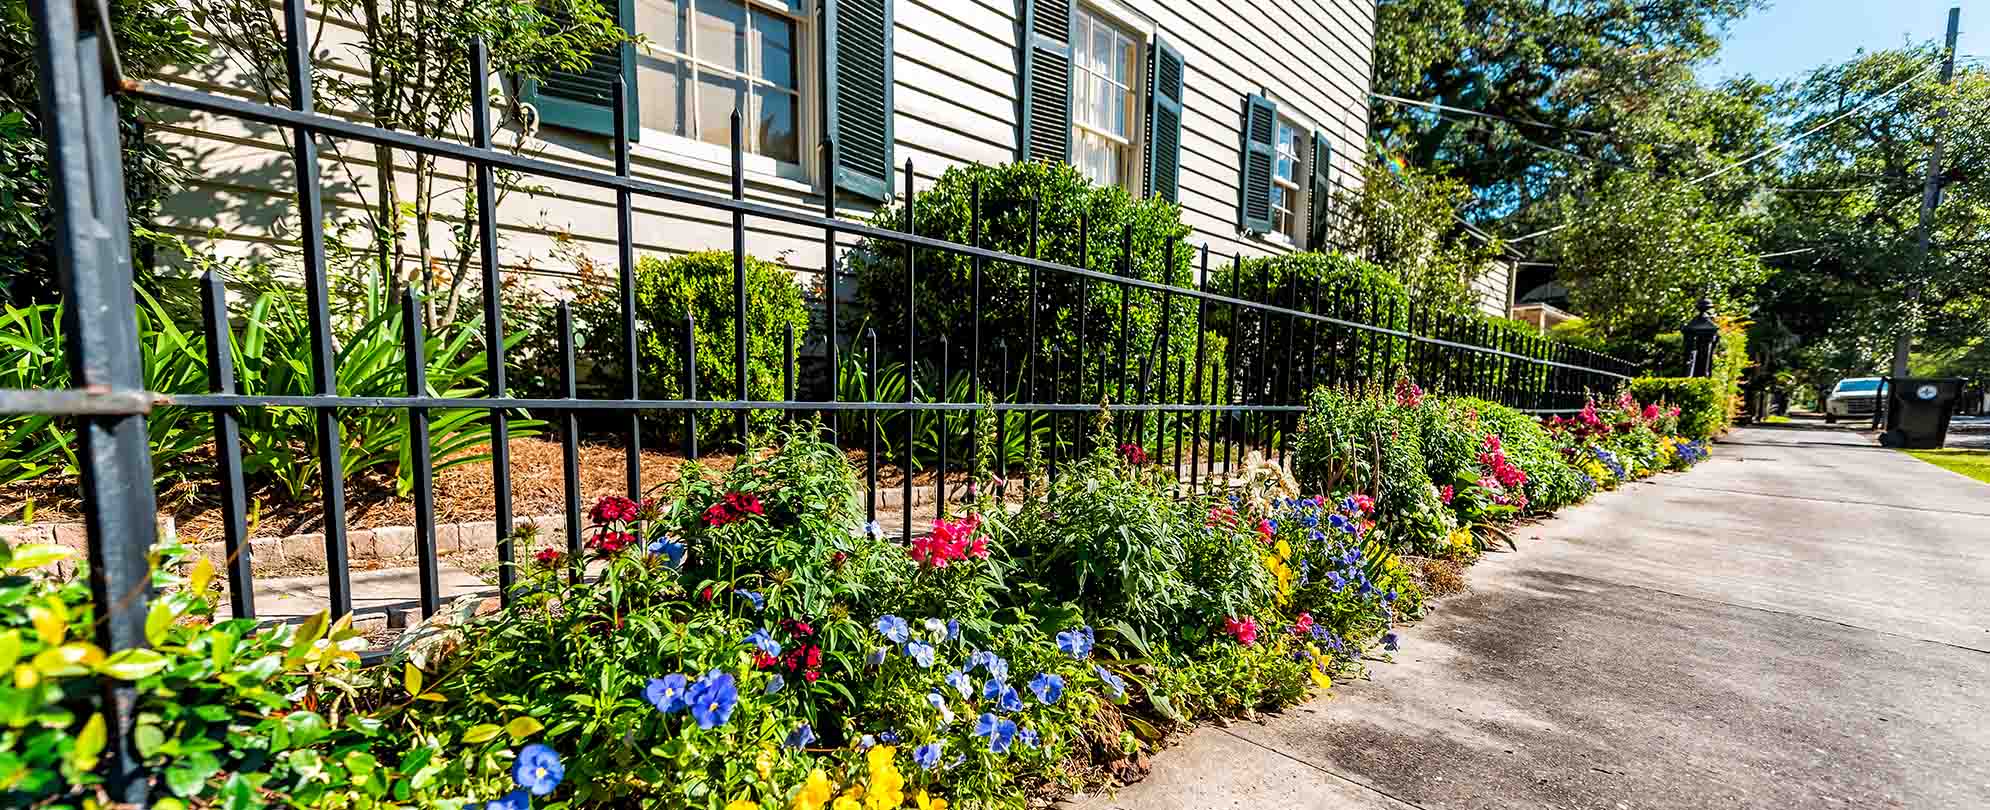 An iron fence surrounded by flowers in the New Orleans garden district.